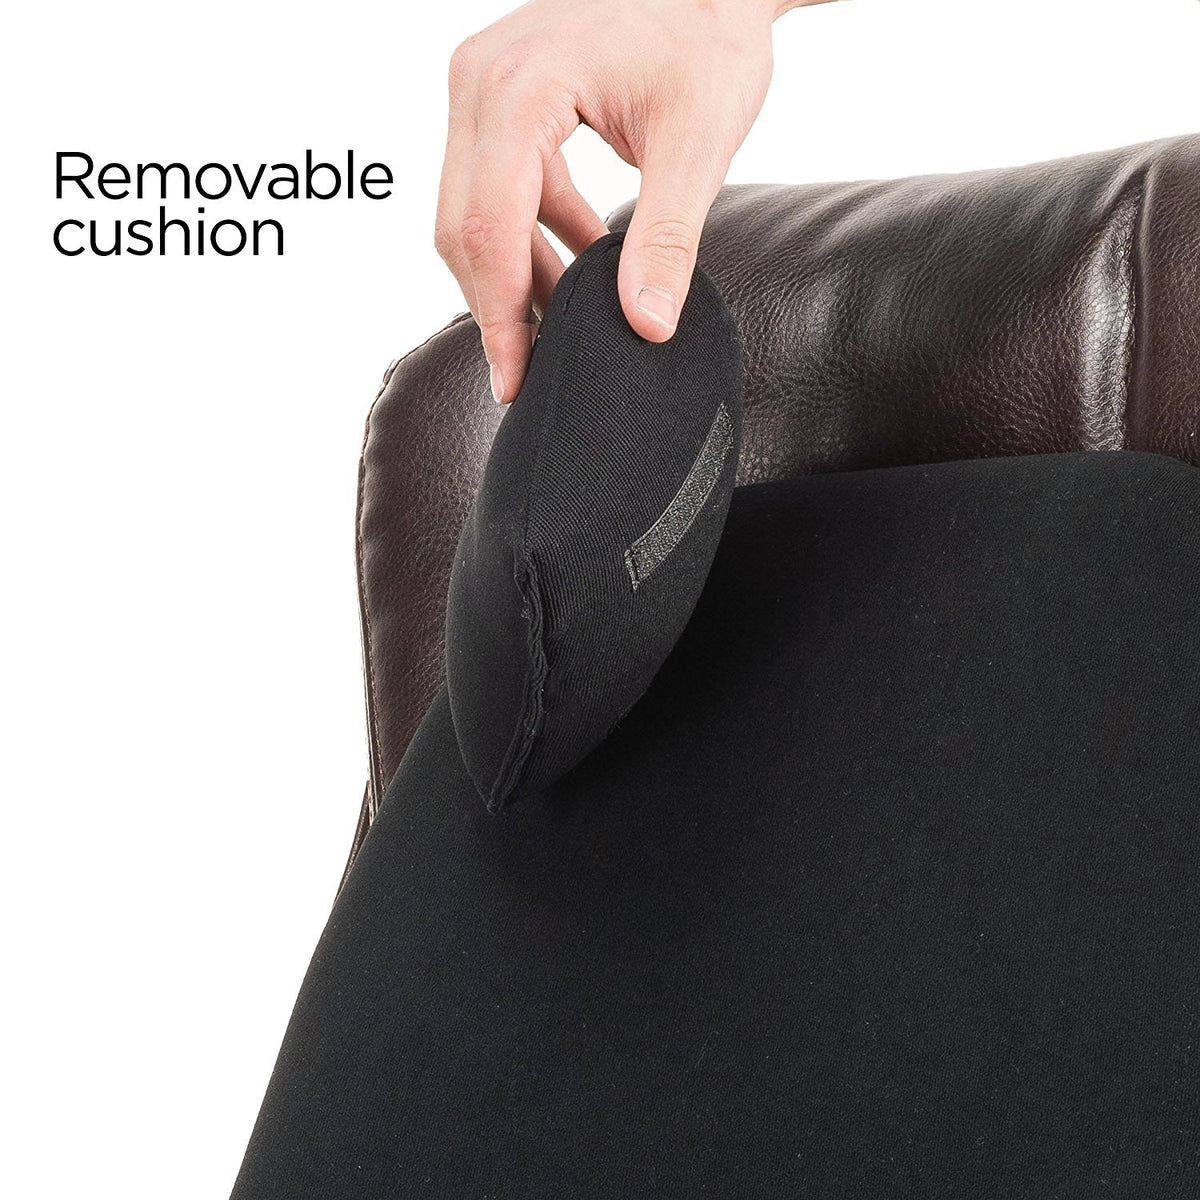 Seat Cushion, Office Chair Cushions, Non-Slip Sciatica, Tailbone Pain  Relief Cushion Pad for Long Sitting, Memory Foam Butt Pillow for Computer  Desk, Driving, Ergonomic Seat Cushion for Office Chairs - Coupon Codes